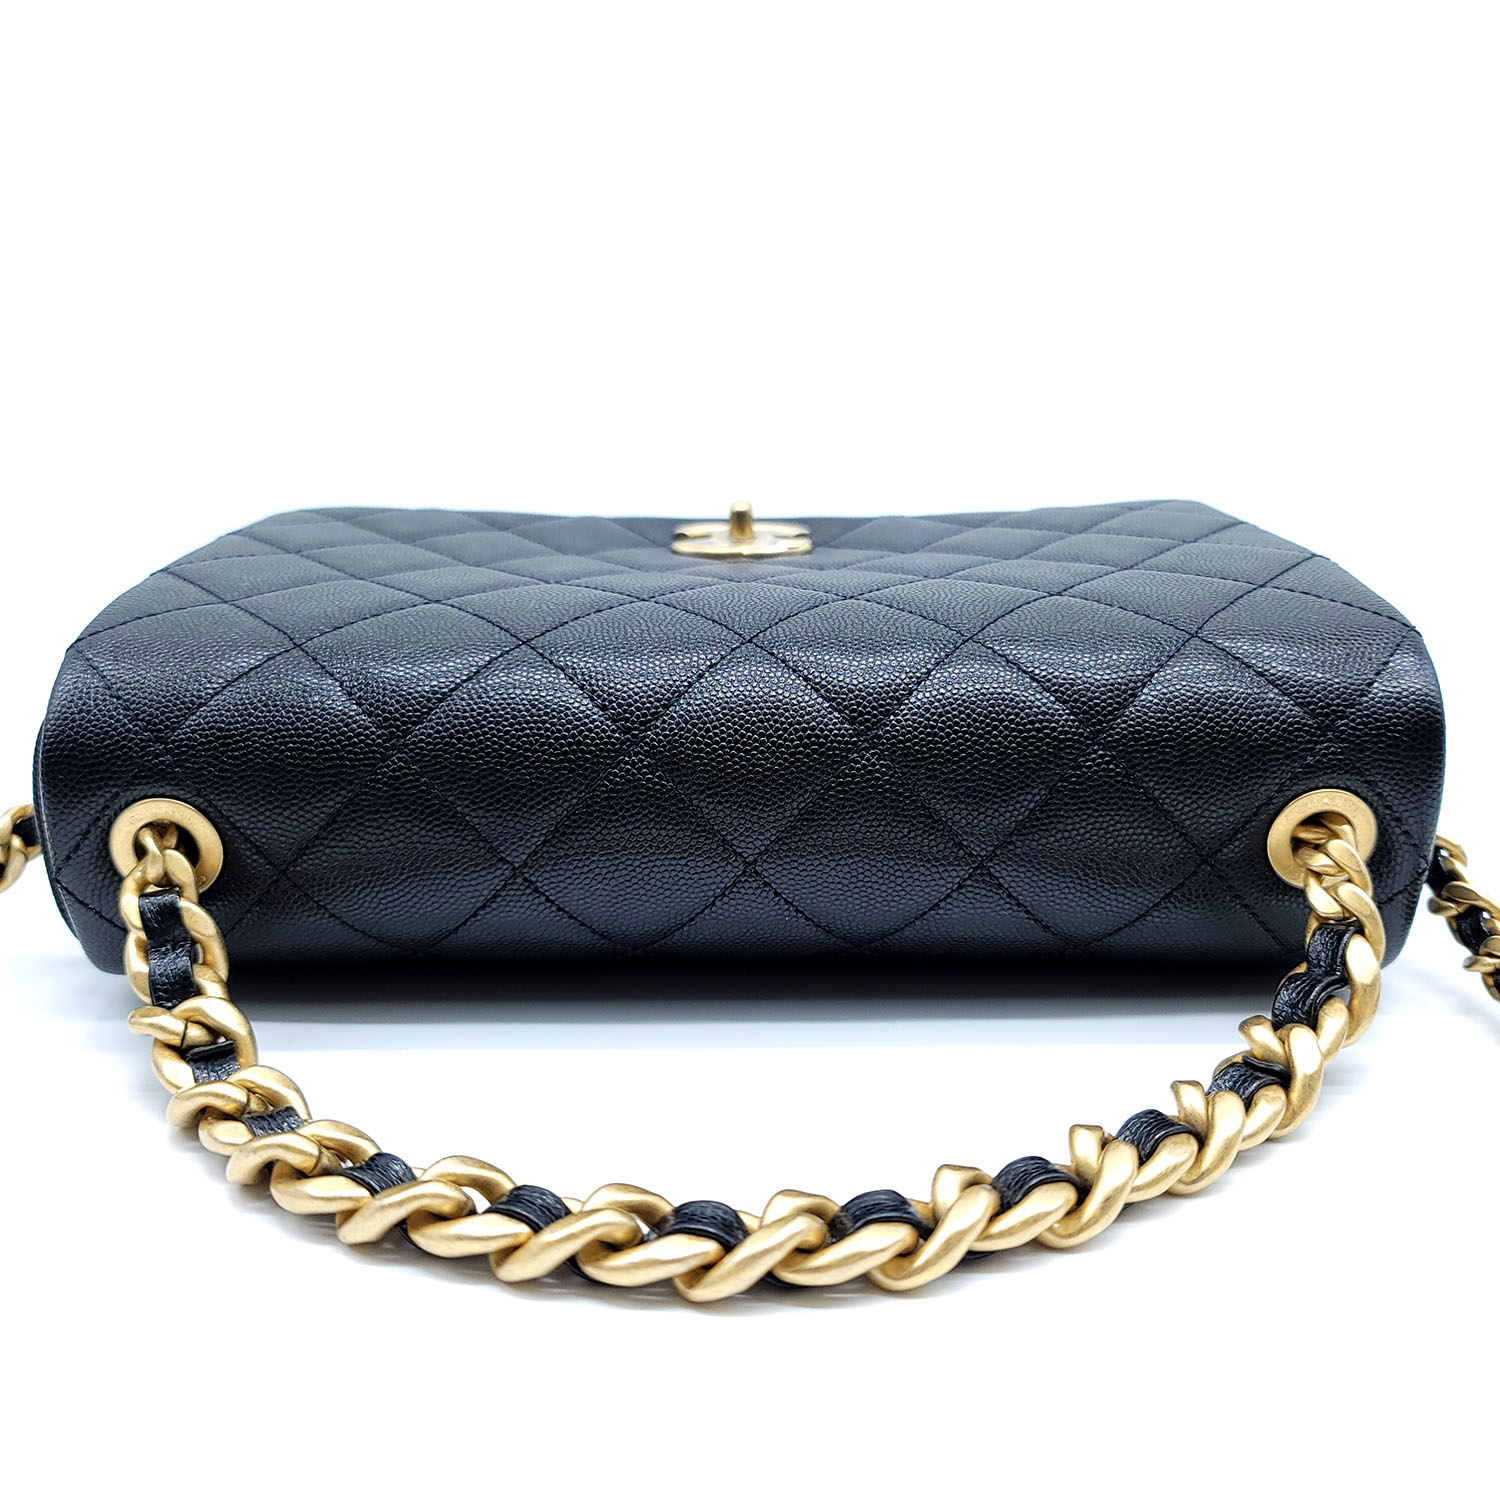 Chanel Flap Bag Black Quilted Caviar – Dr. Runway